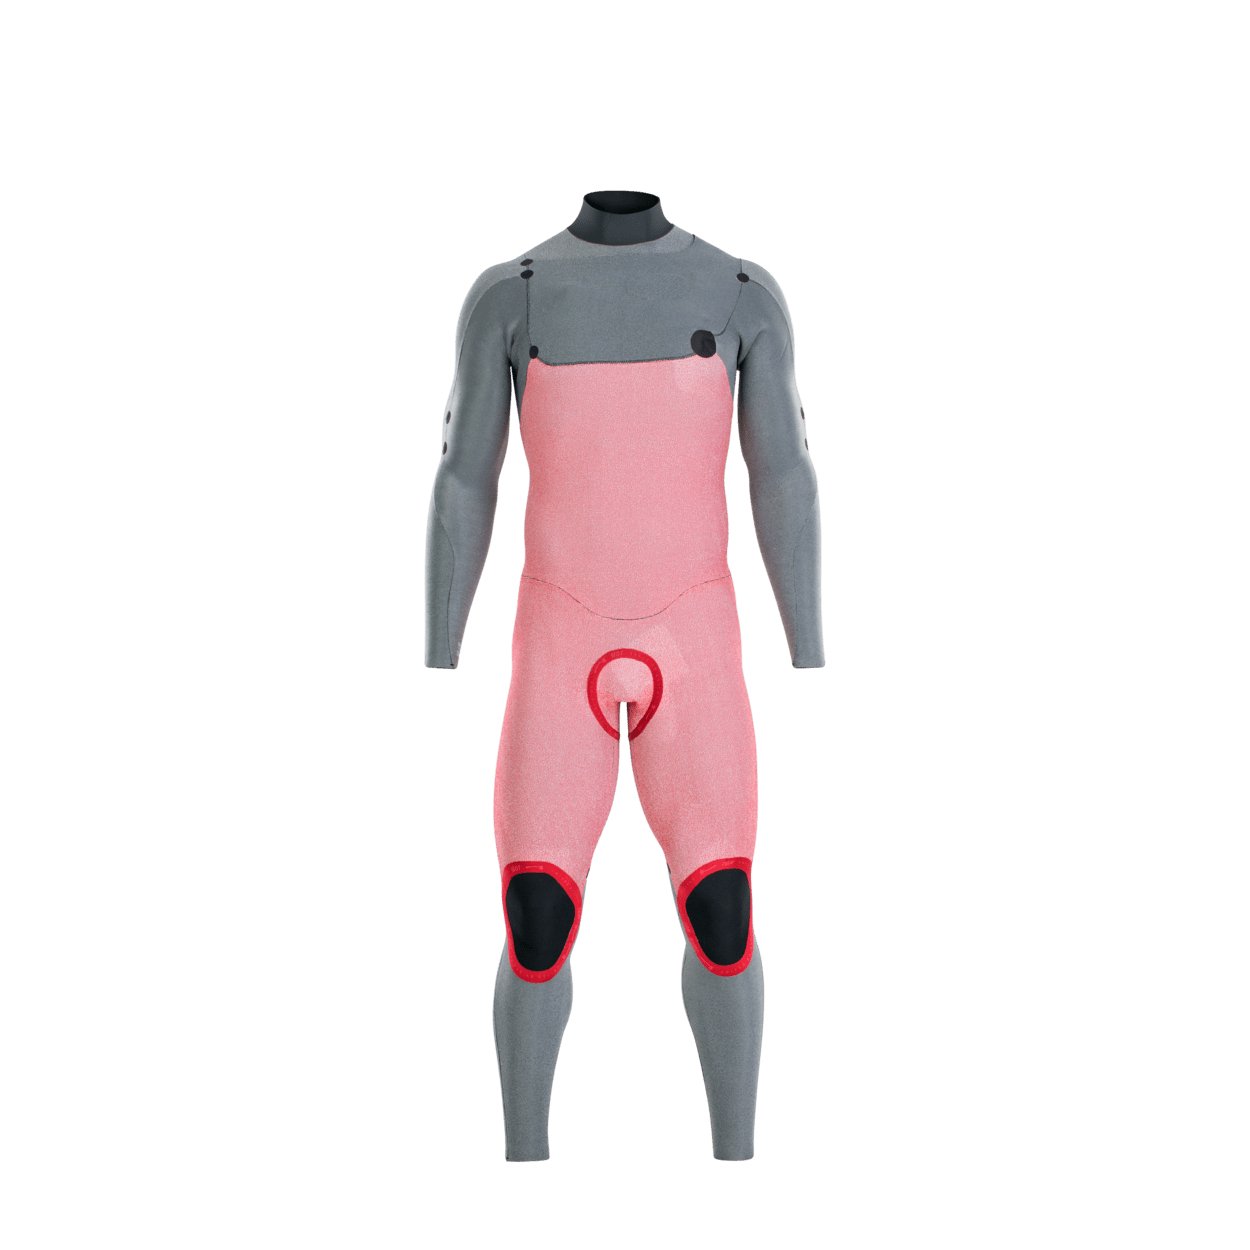 ION Seek Core 5/4 Front Zip 2022 - Worthing Watersports - 9010583056739 - Wetsuits - ION Water